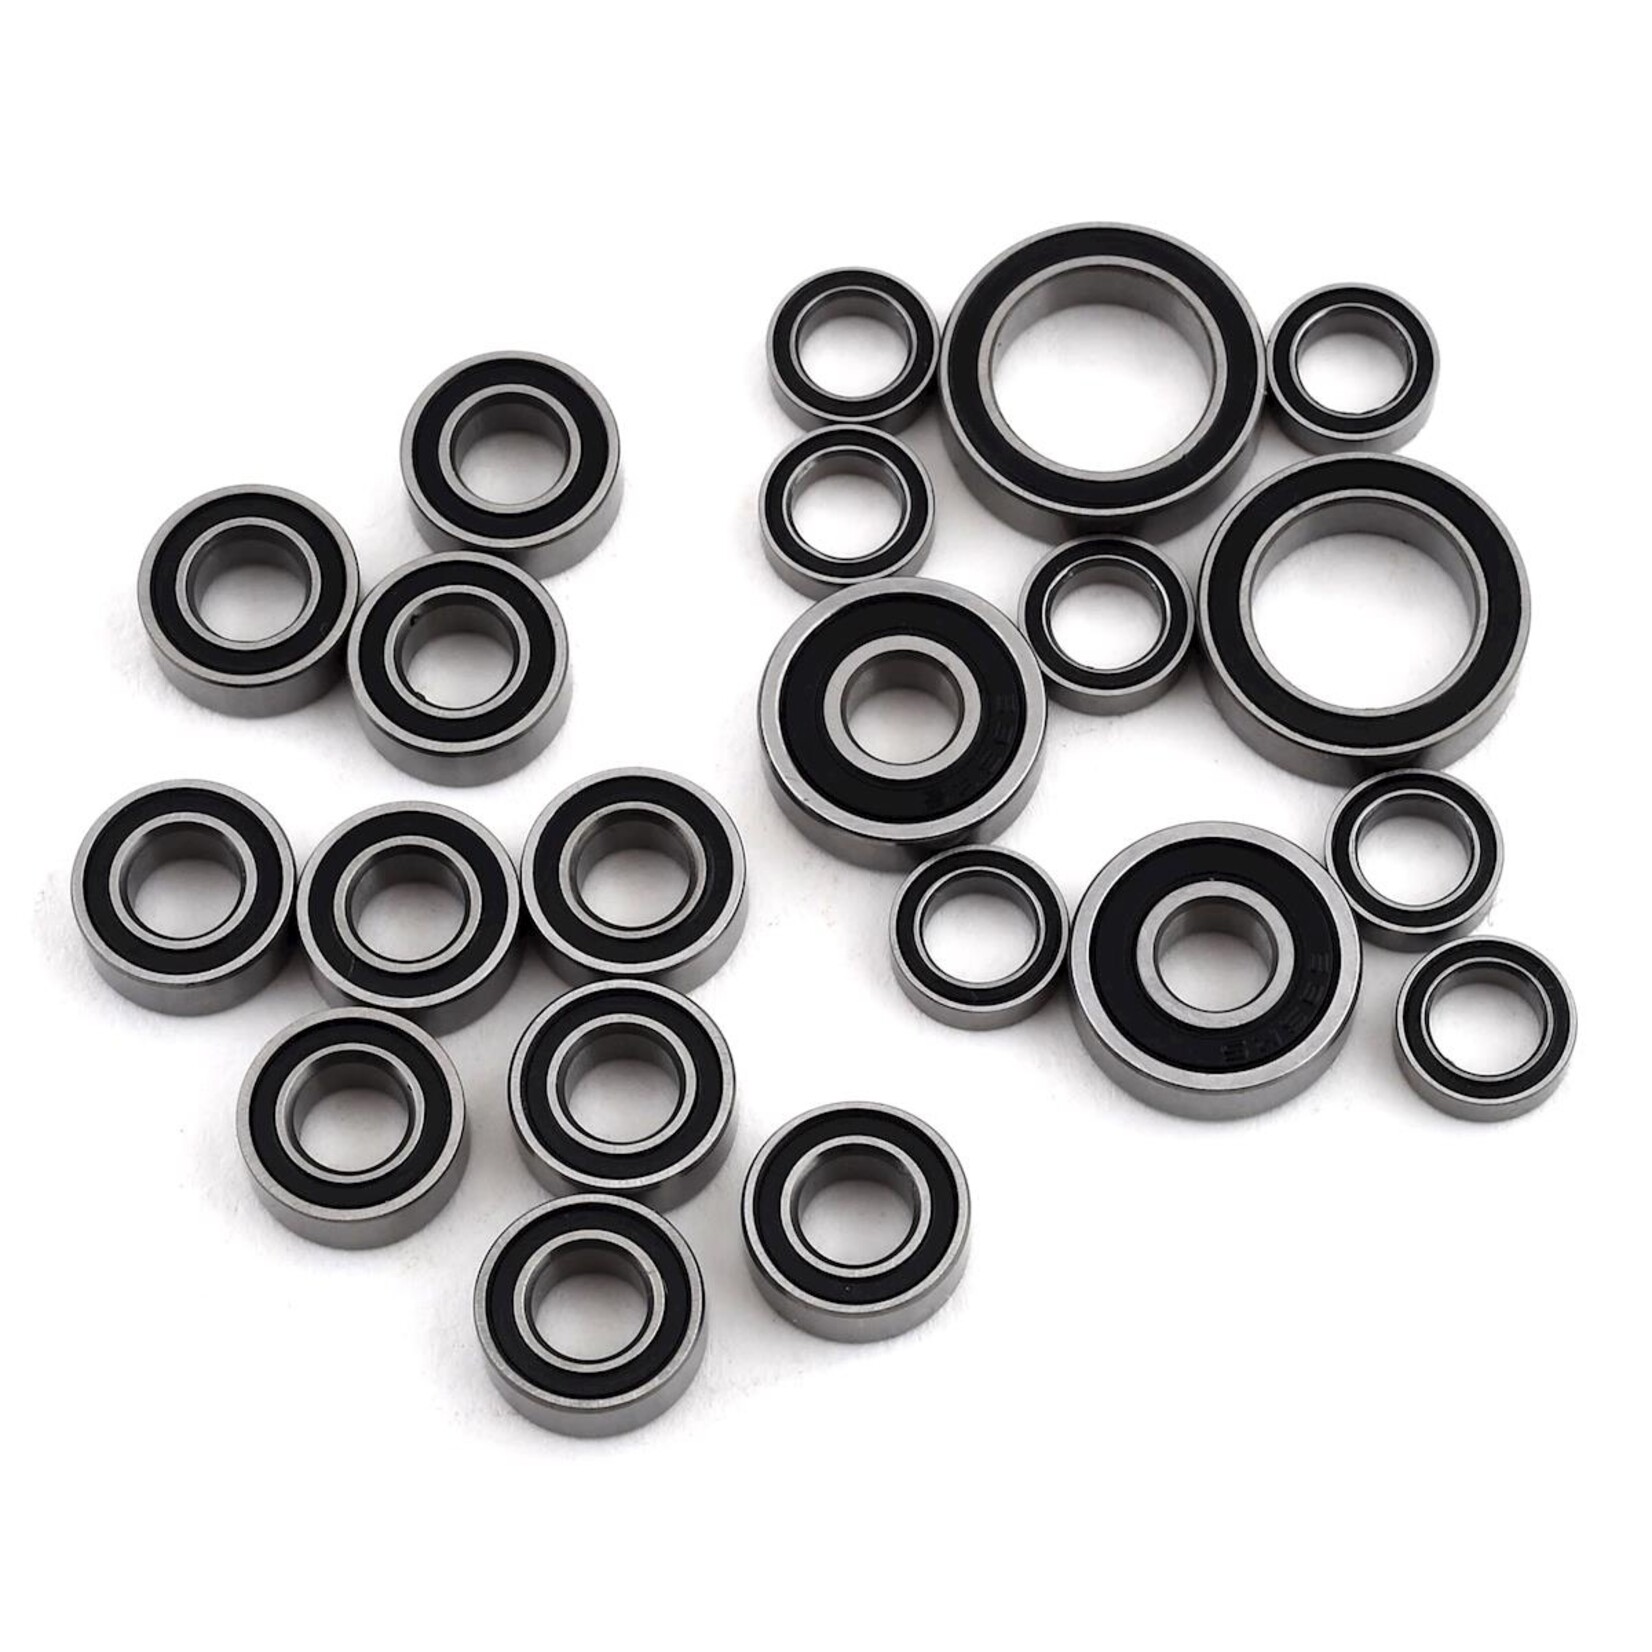 FastEddy FastEddy Axial Capra 1.9 Unlimited Trail Buggy Kit Sealed Bearing Kit #TFE5837